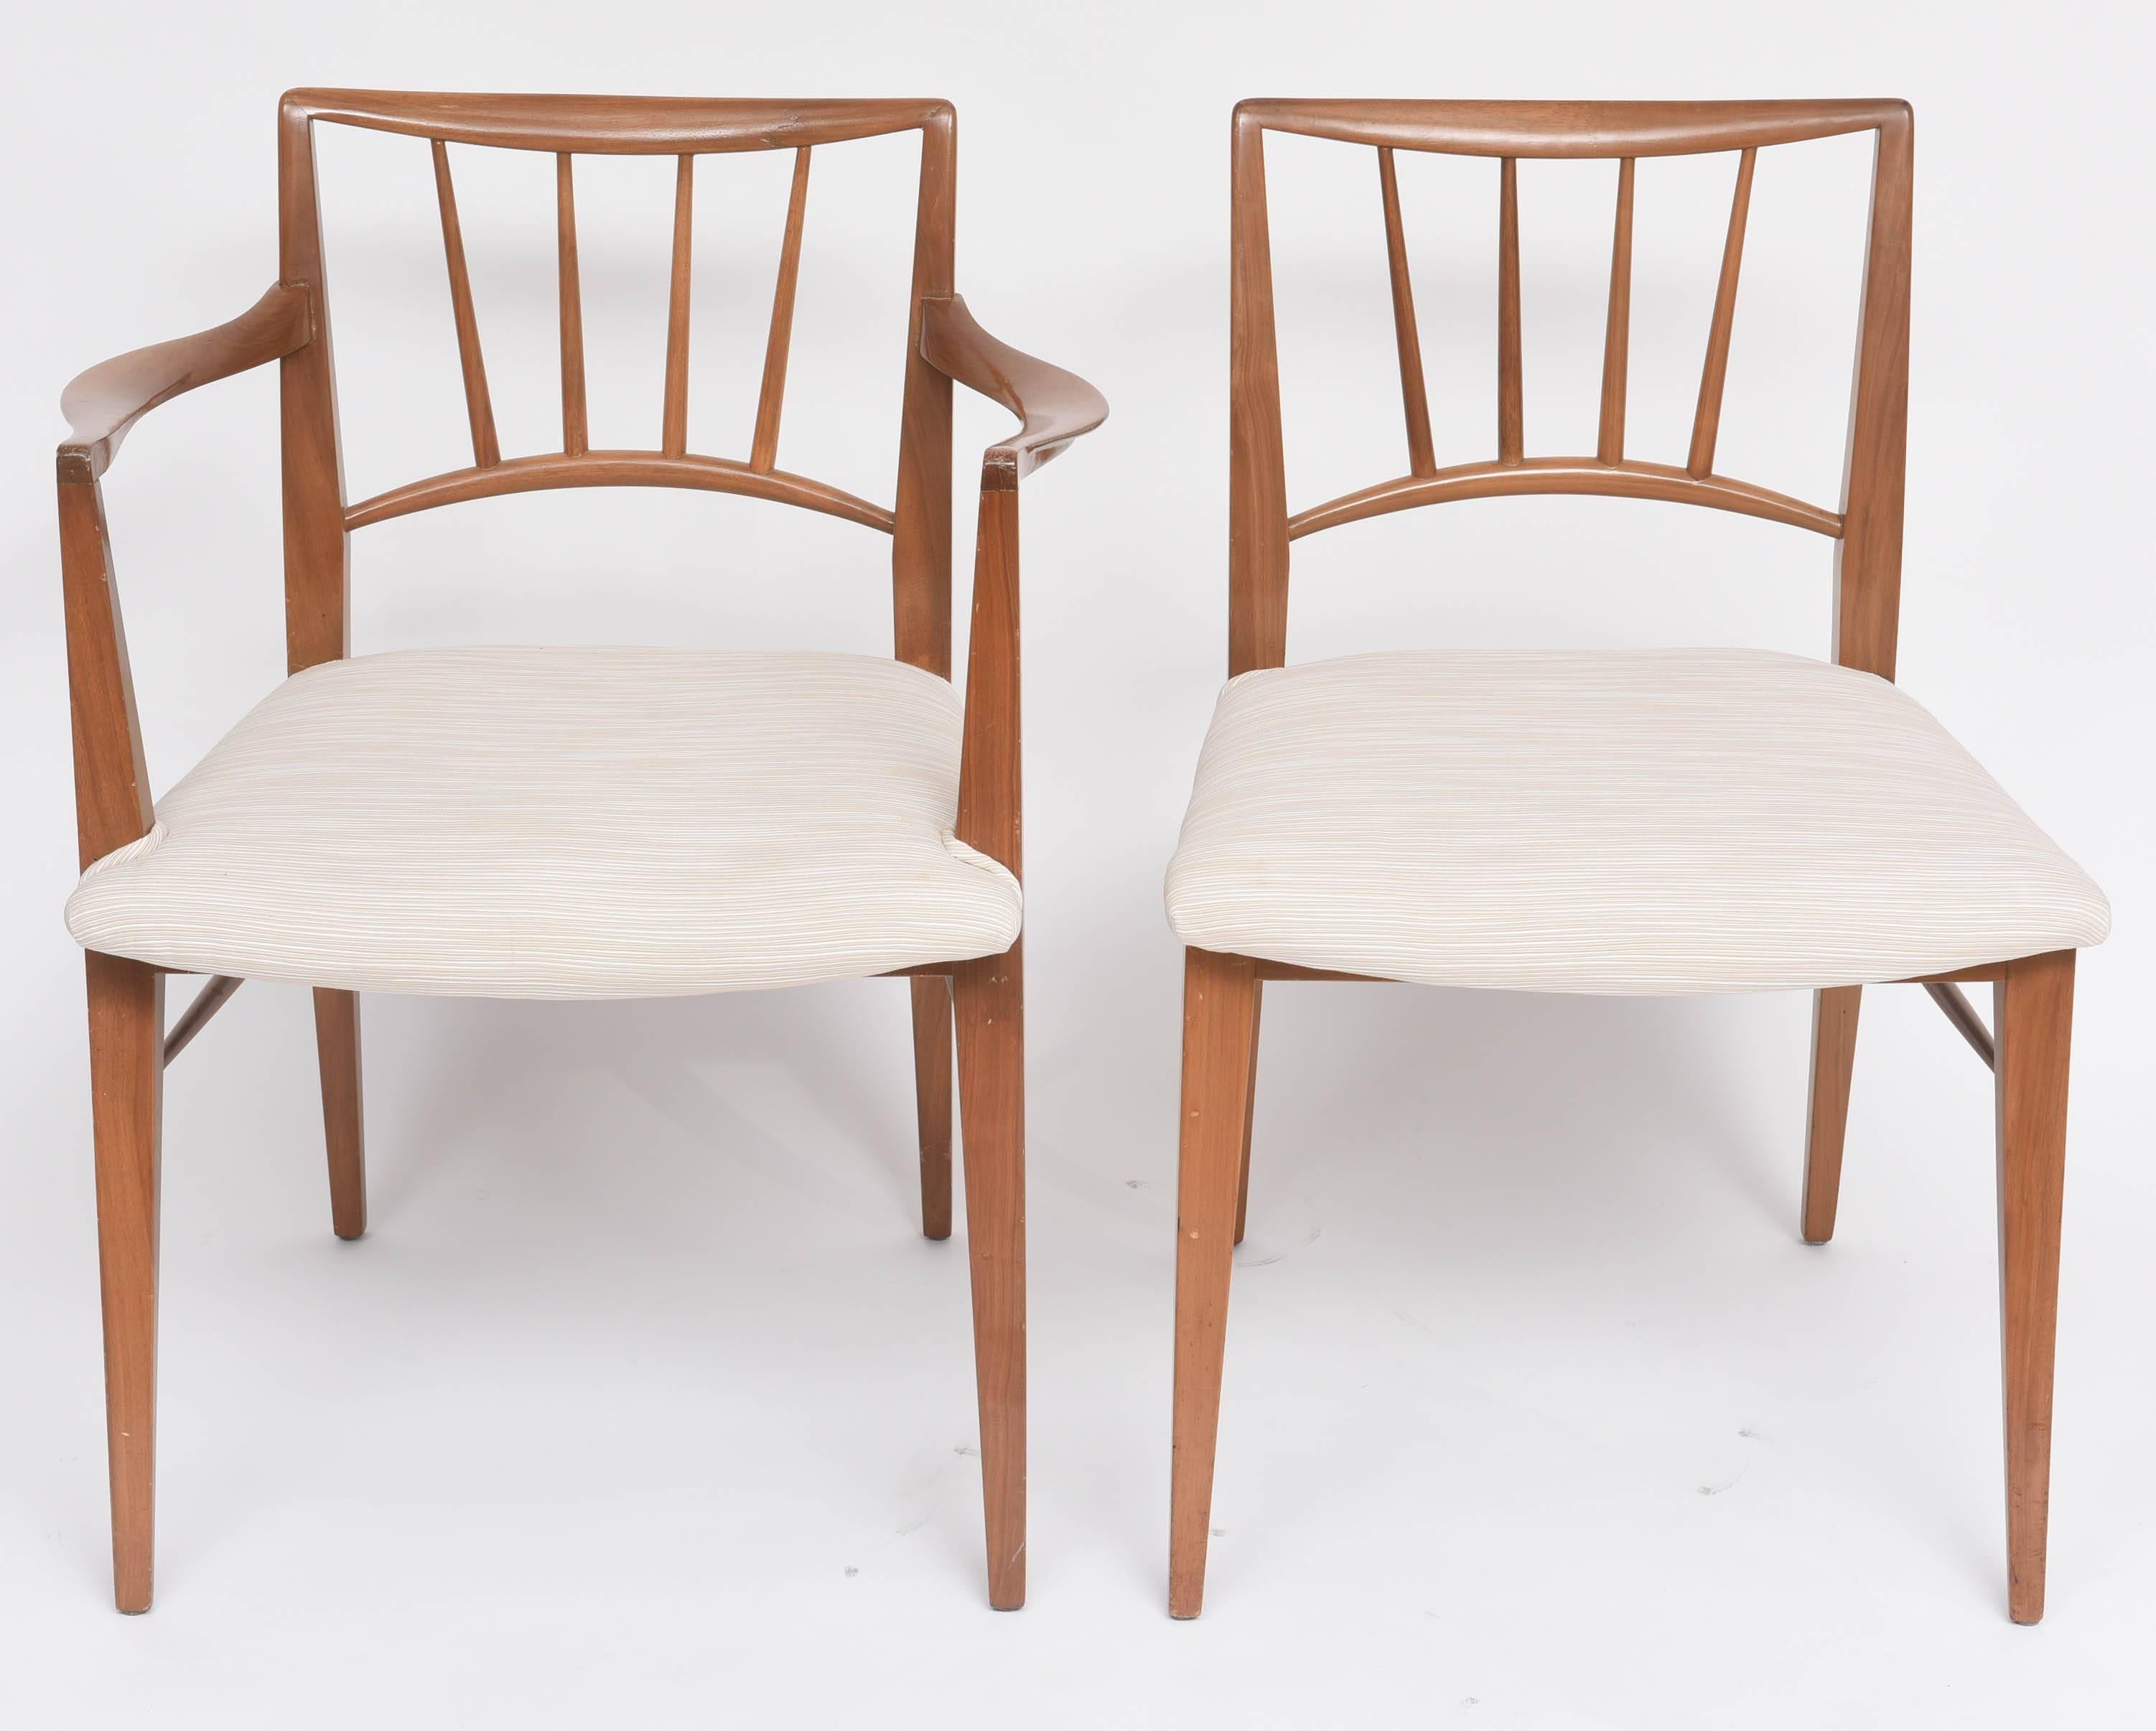 This set of six dining chairs date from the 1950s and were designed by the iconic furniture designer Edward Wormley for Dunbar Furniture. Here Wormley has put the American Modern take on the English spoke-back chair.

Please feel free to contact